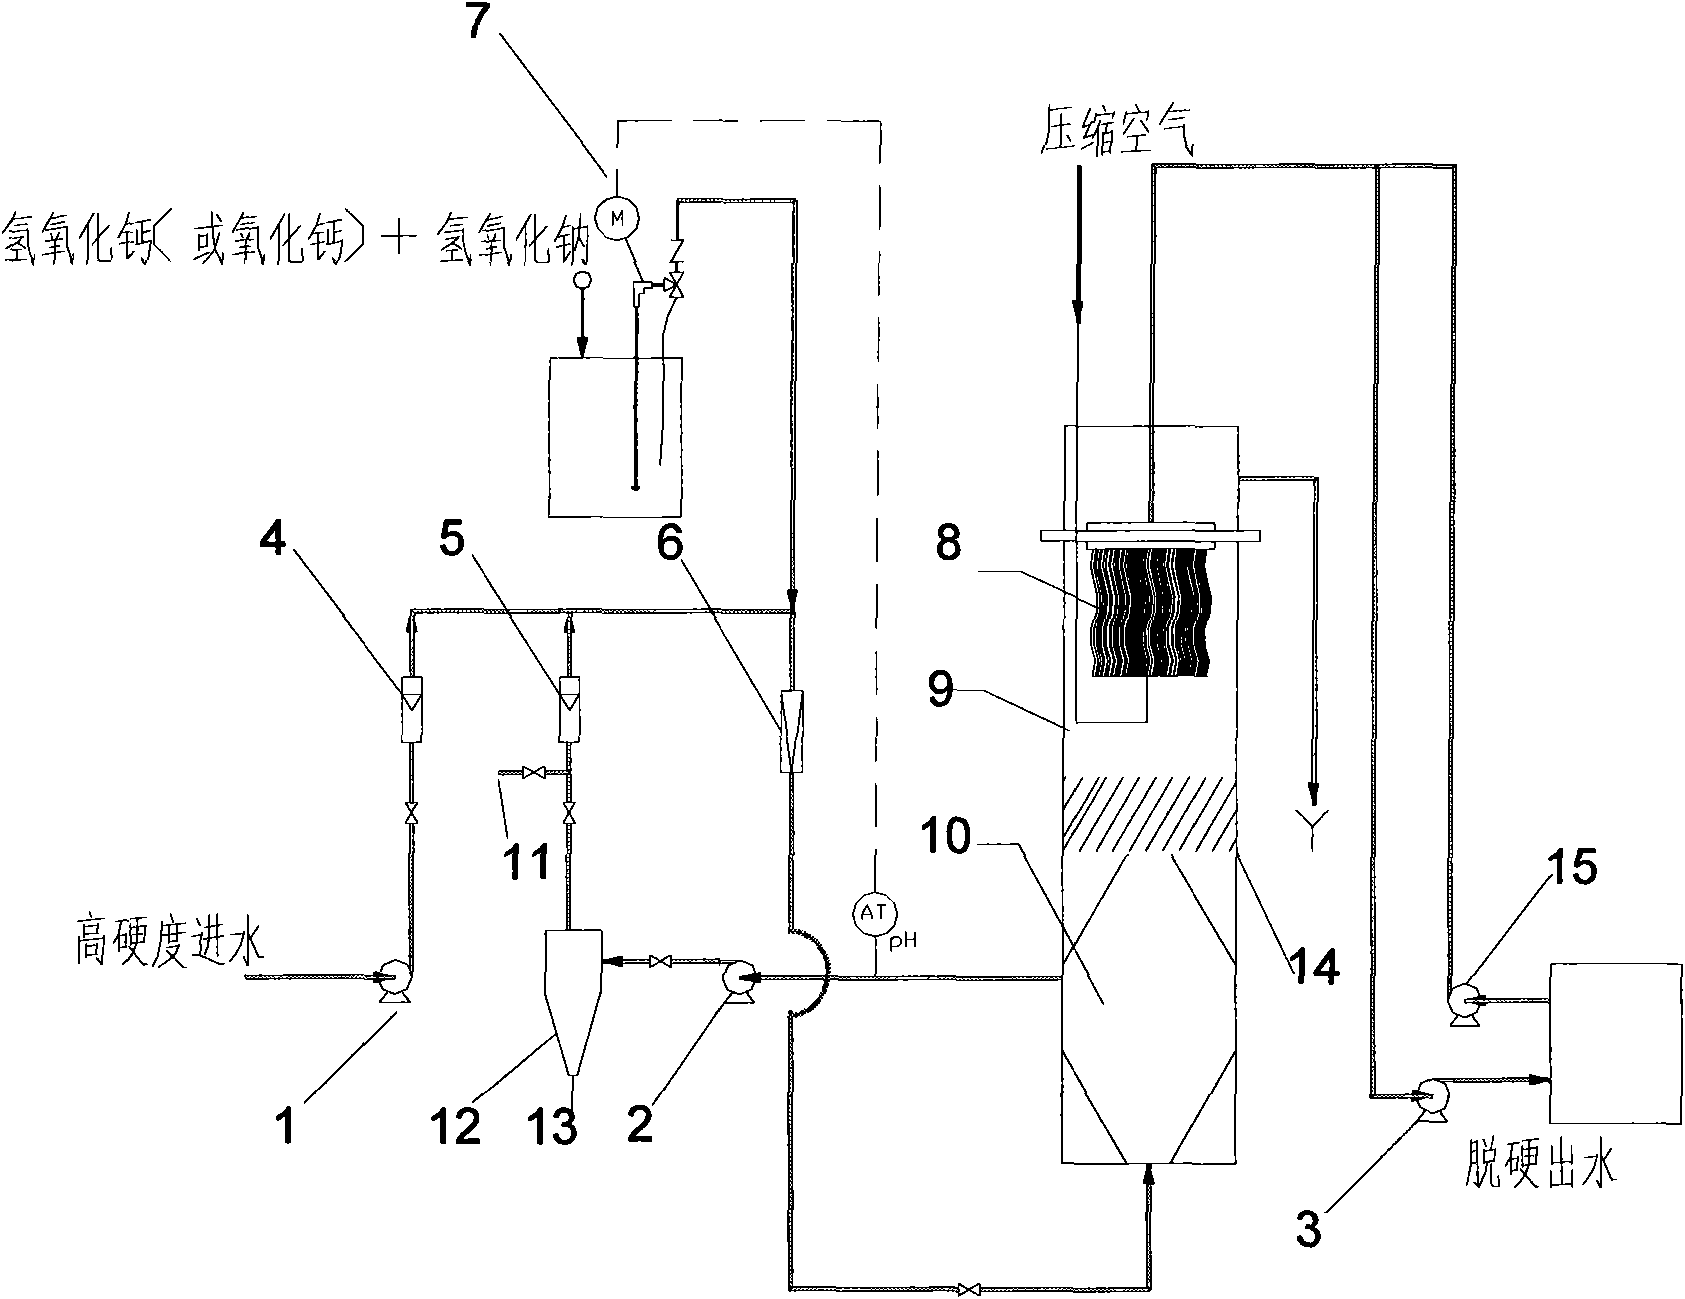 Integrated device for removing water hardness